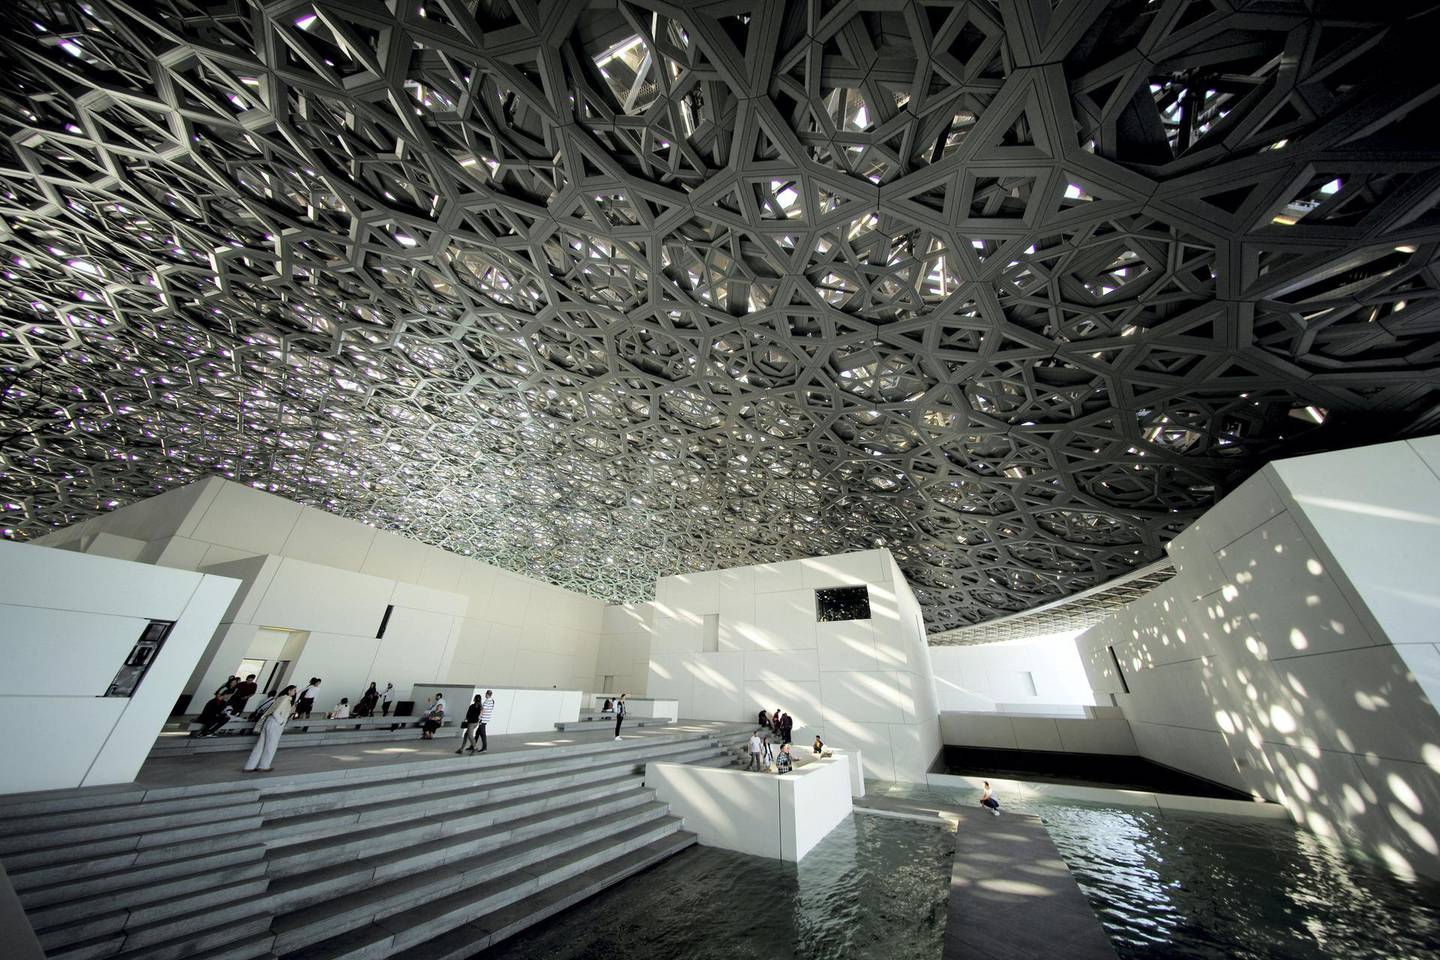 FILE PHOTO: Visitors look at the dome hall design of the Louvre Abu Dhabi Museum in Abu Dhabi, United Arab Emirates, December 25, 2018. Picture taken December 25, 2018. REUTERS/Hamad I Mohammed/File Photo